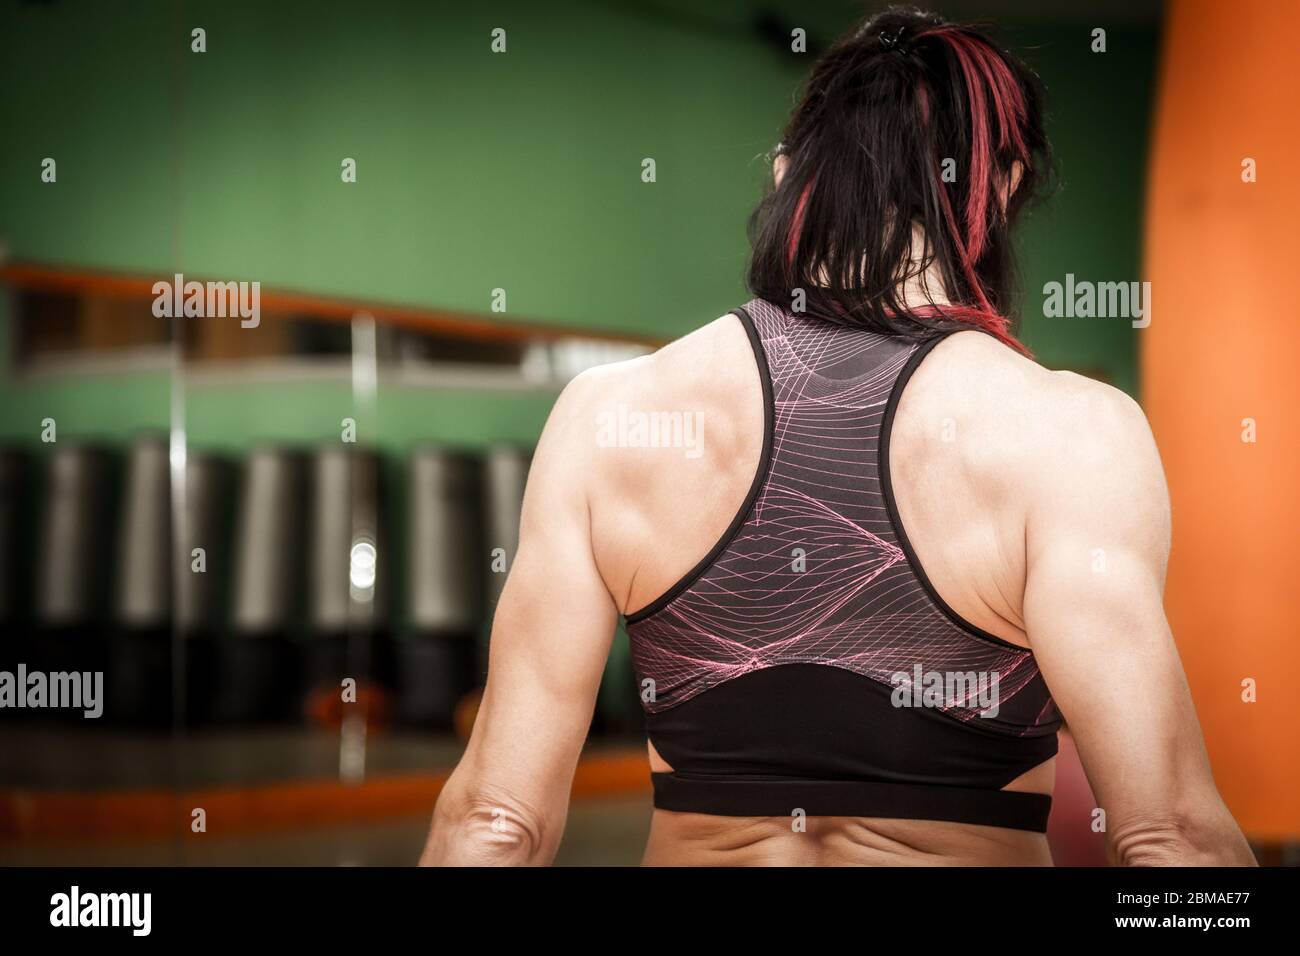 Woman athlete doing exercises with weights and dumbbells in the